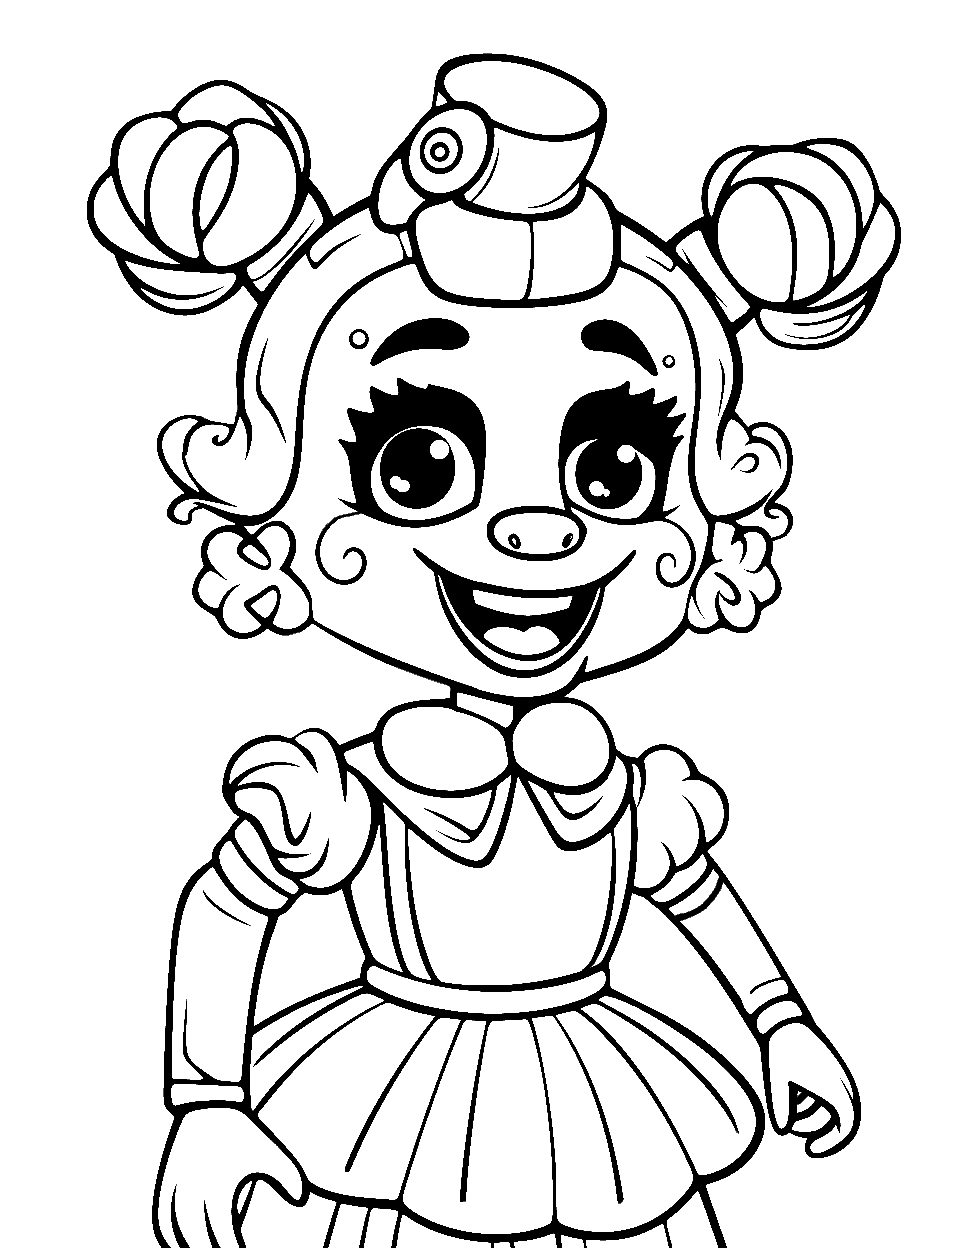 Sister Location Surprise Coloring Page - A character from Sister Location smiling warmly.